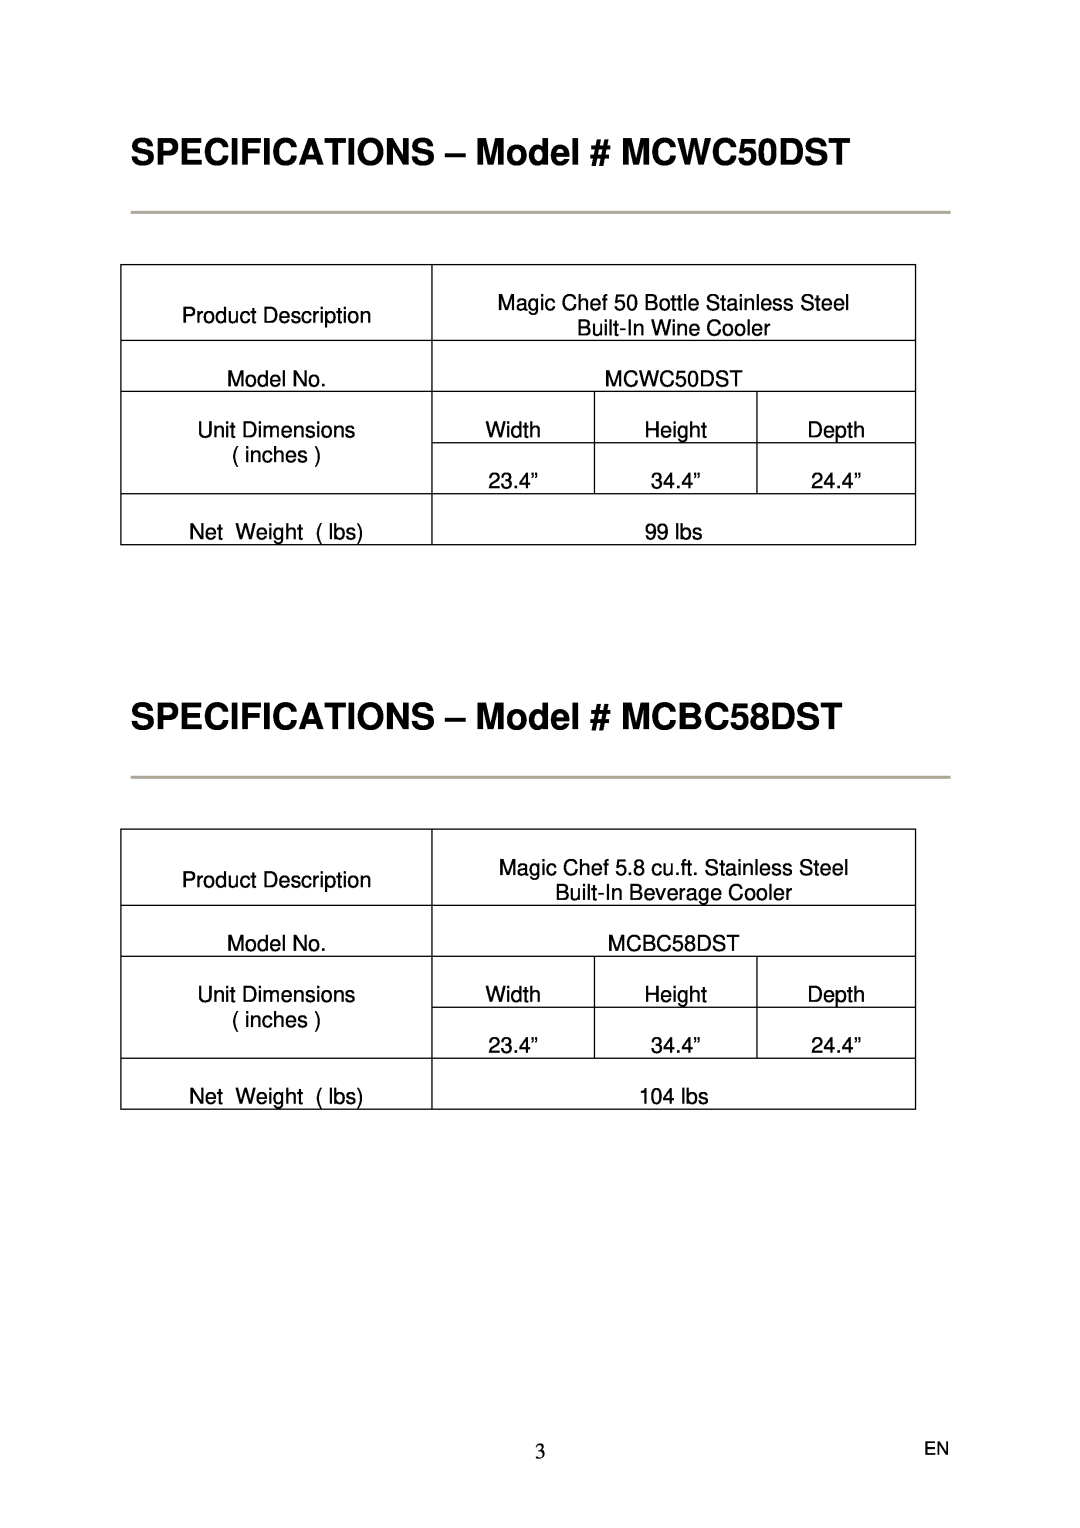 Magic Chef instruction manual SPECIFICATIONS - Model # MCWC50DST, SPECIFICATIONS - Model # MCBC58DST 